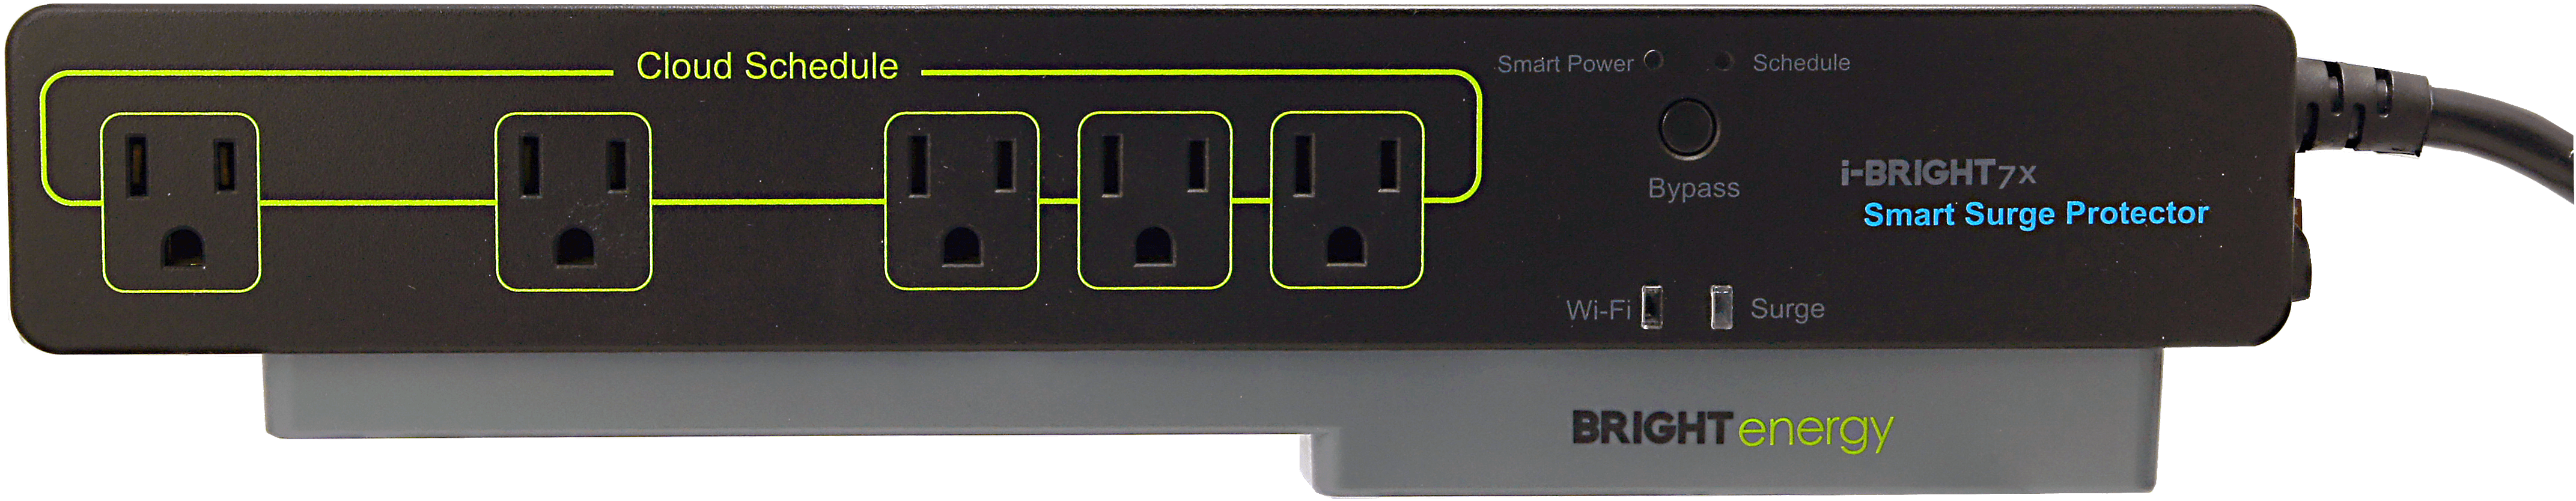 Wi-Fi-enabled i-BRIGHT7x 4ft Smart Surge Protector